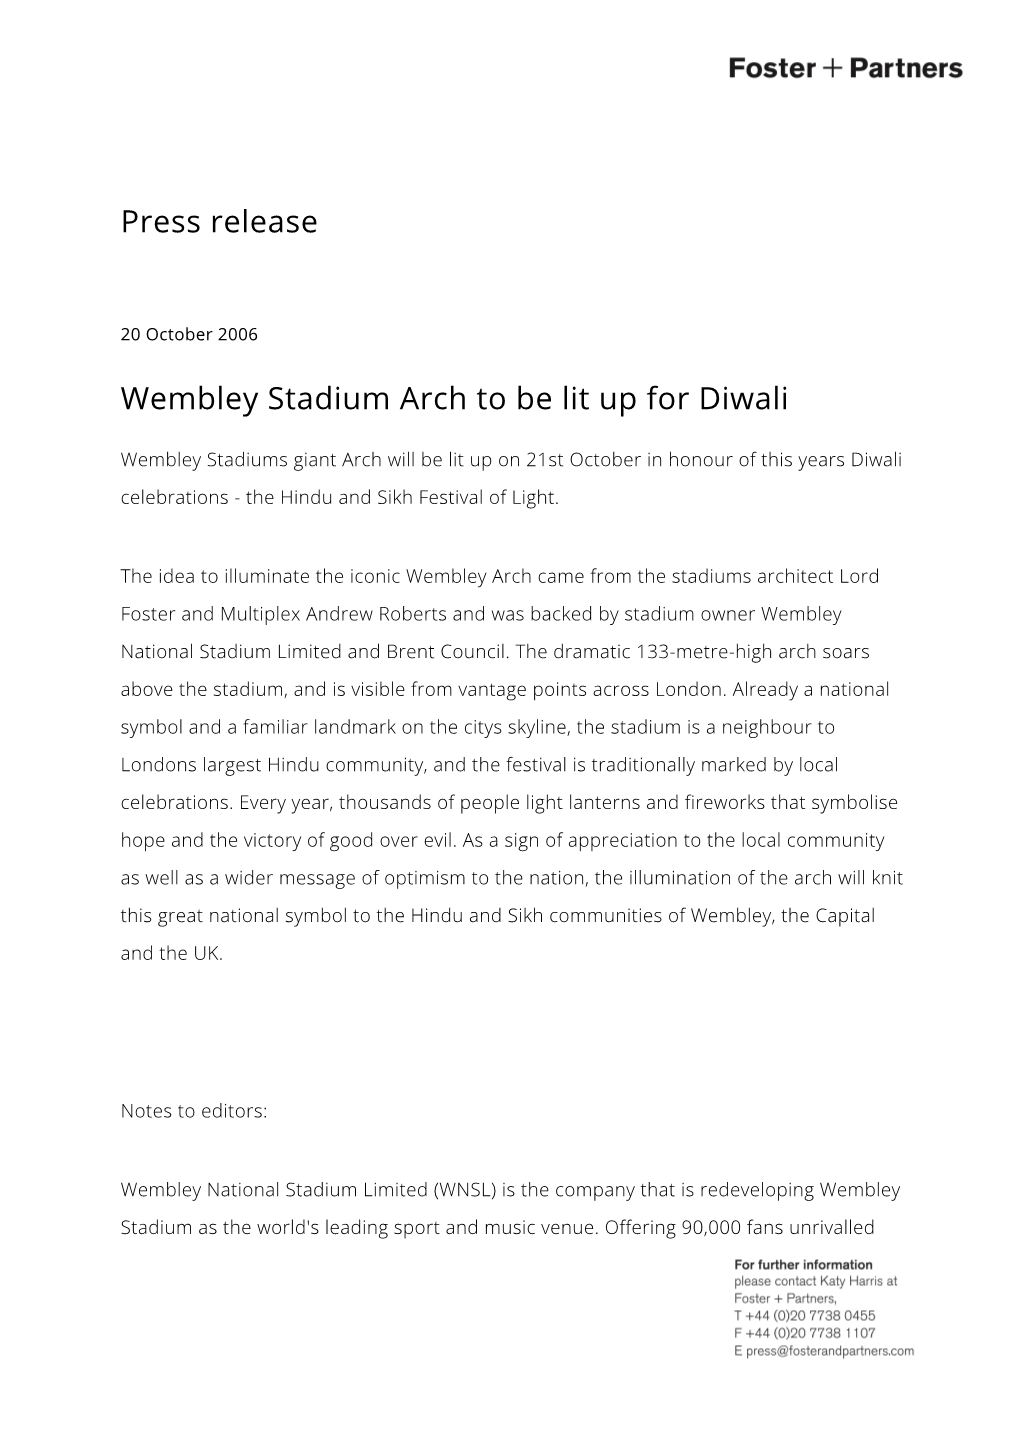 Press Release Wembley Stadium Arch to Be Lit up for Diwali